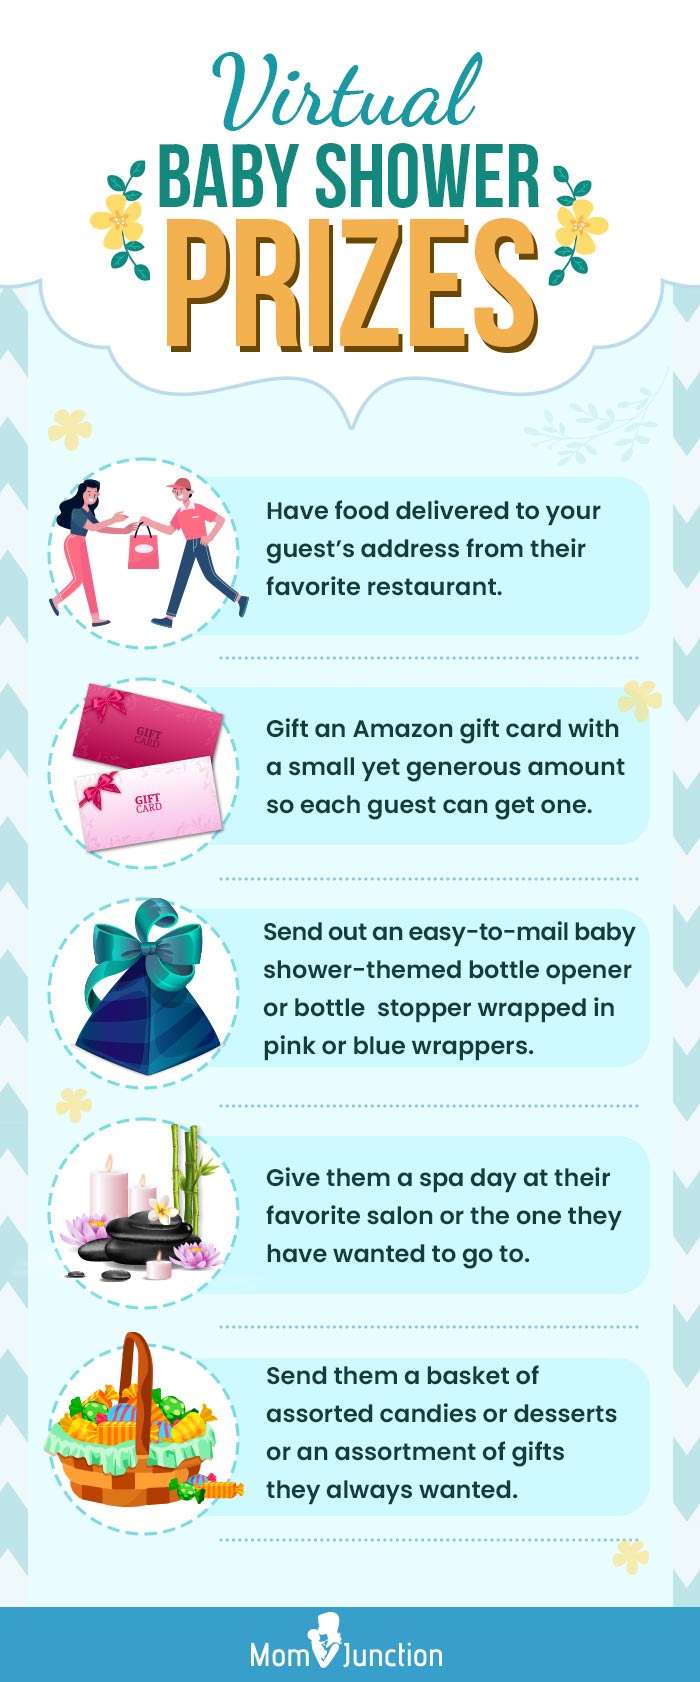 virtual baby shower prizes (infographic)